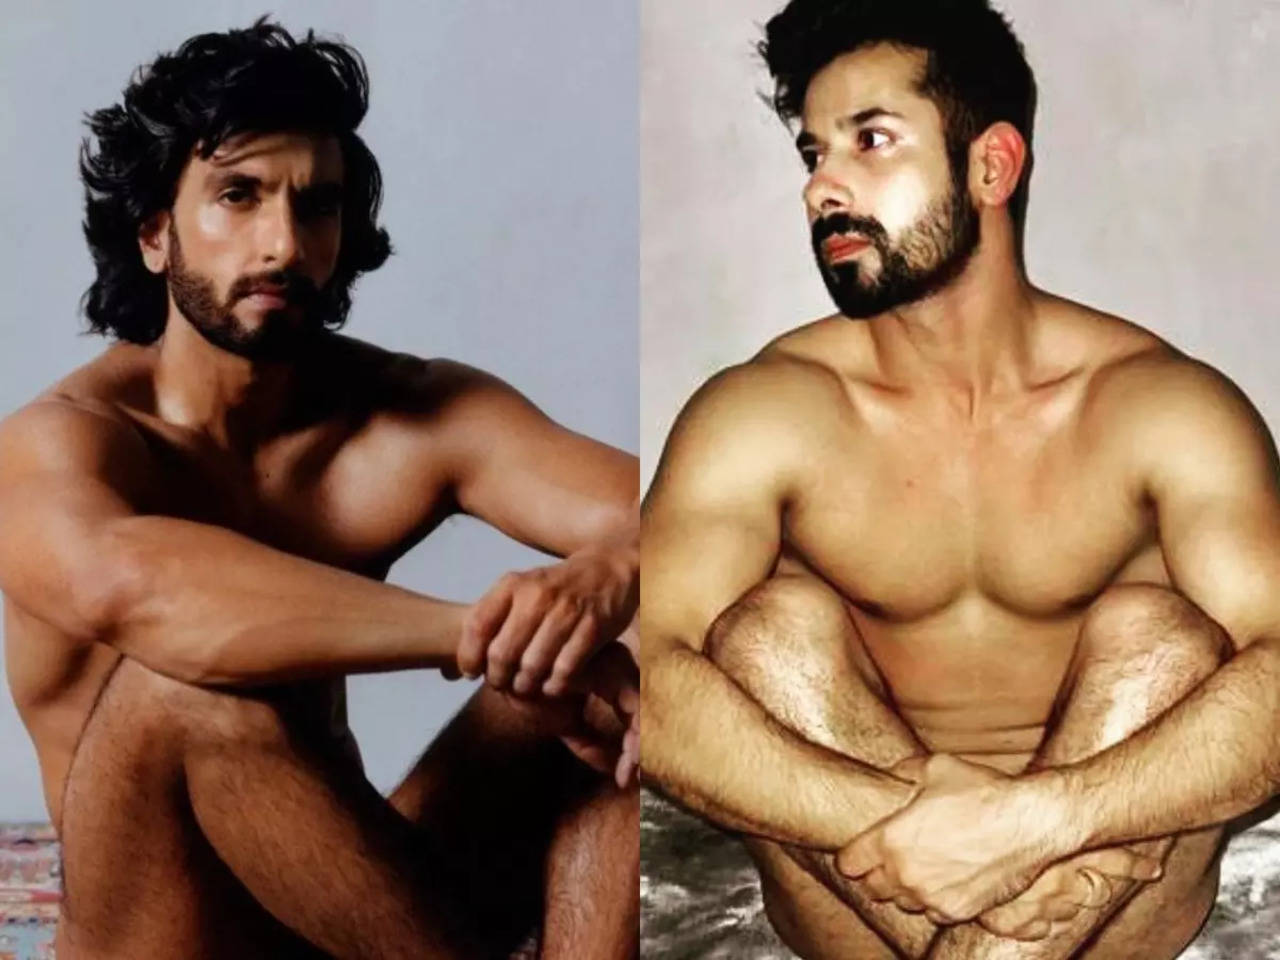 Exclusive Inspired by Ranveer Singh, actor Kunal Verma shares a photo showing his nude body, says I have worked hard so why not flaunt it?